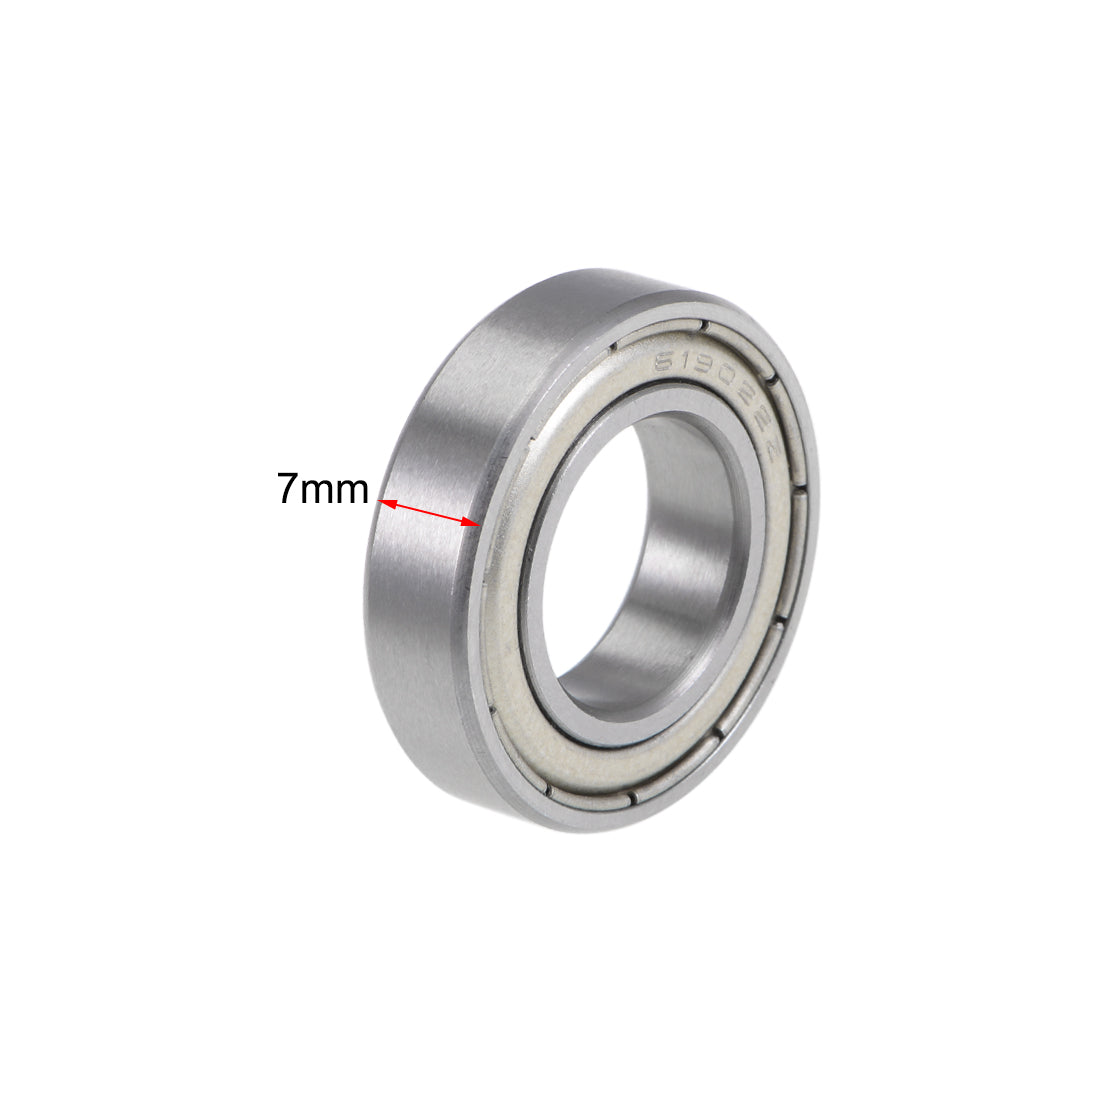 uxcell Uxcell Deep Groove Ball Bearings Metric Double Shield Chrome Steel P0 Z2